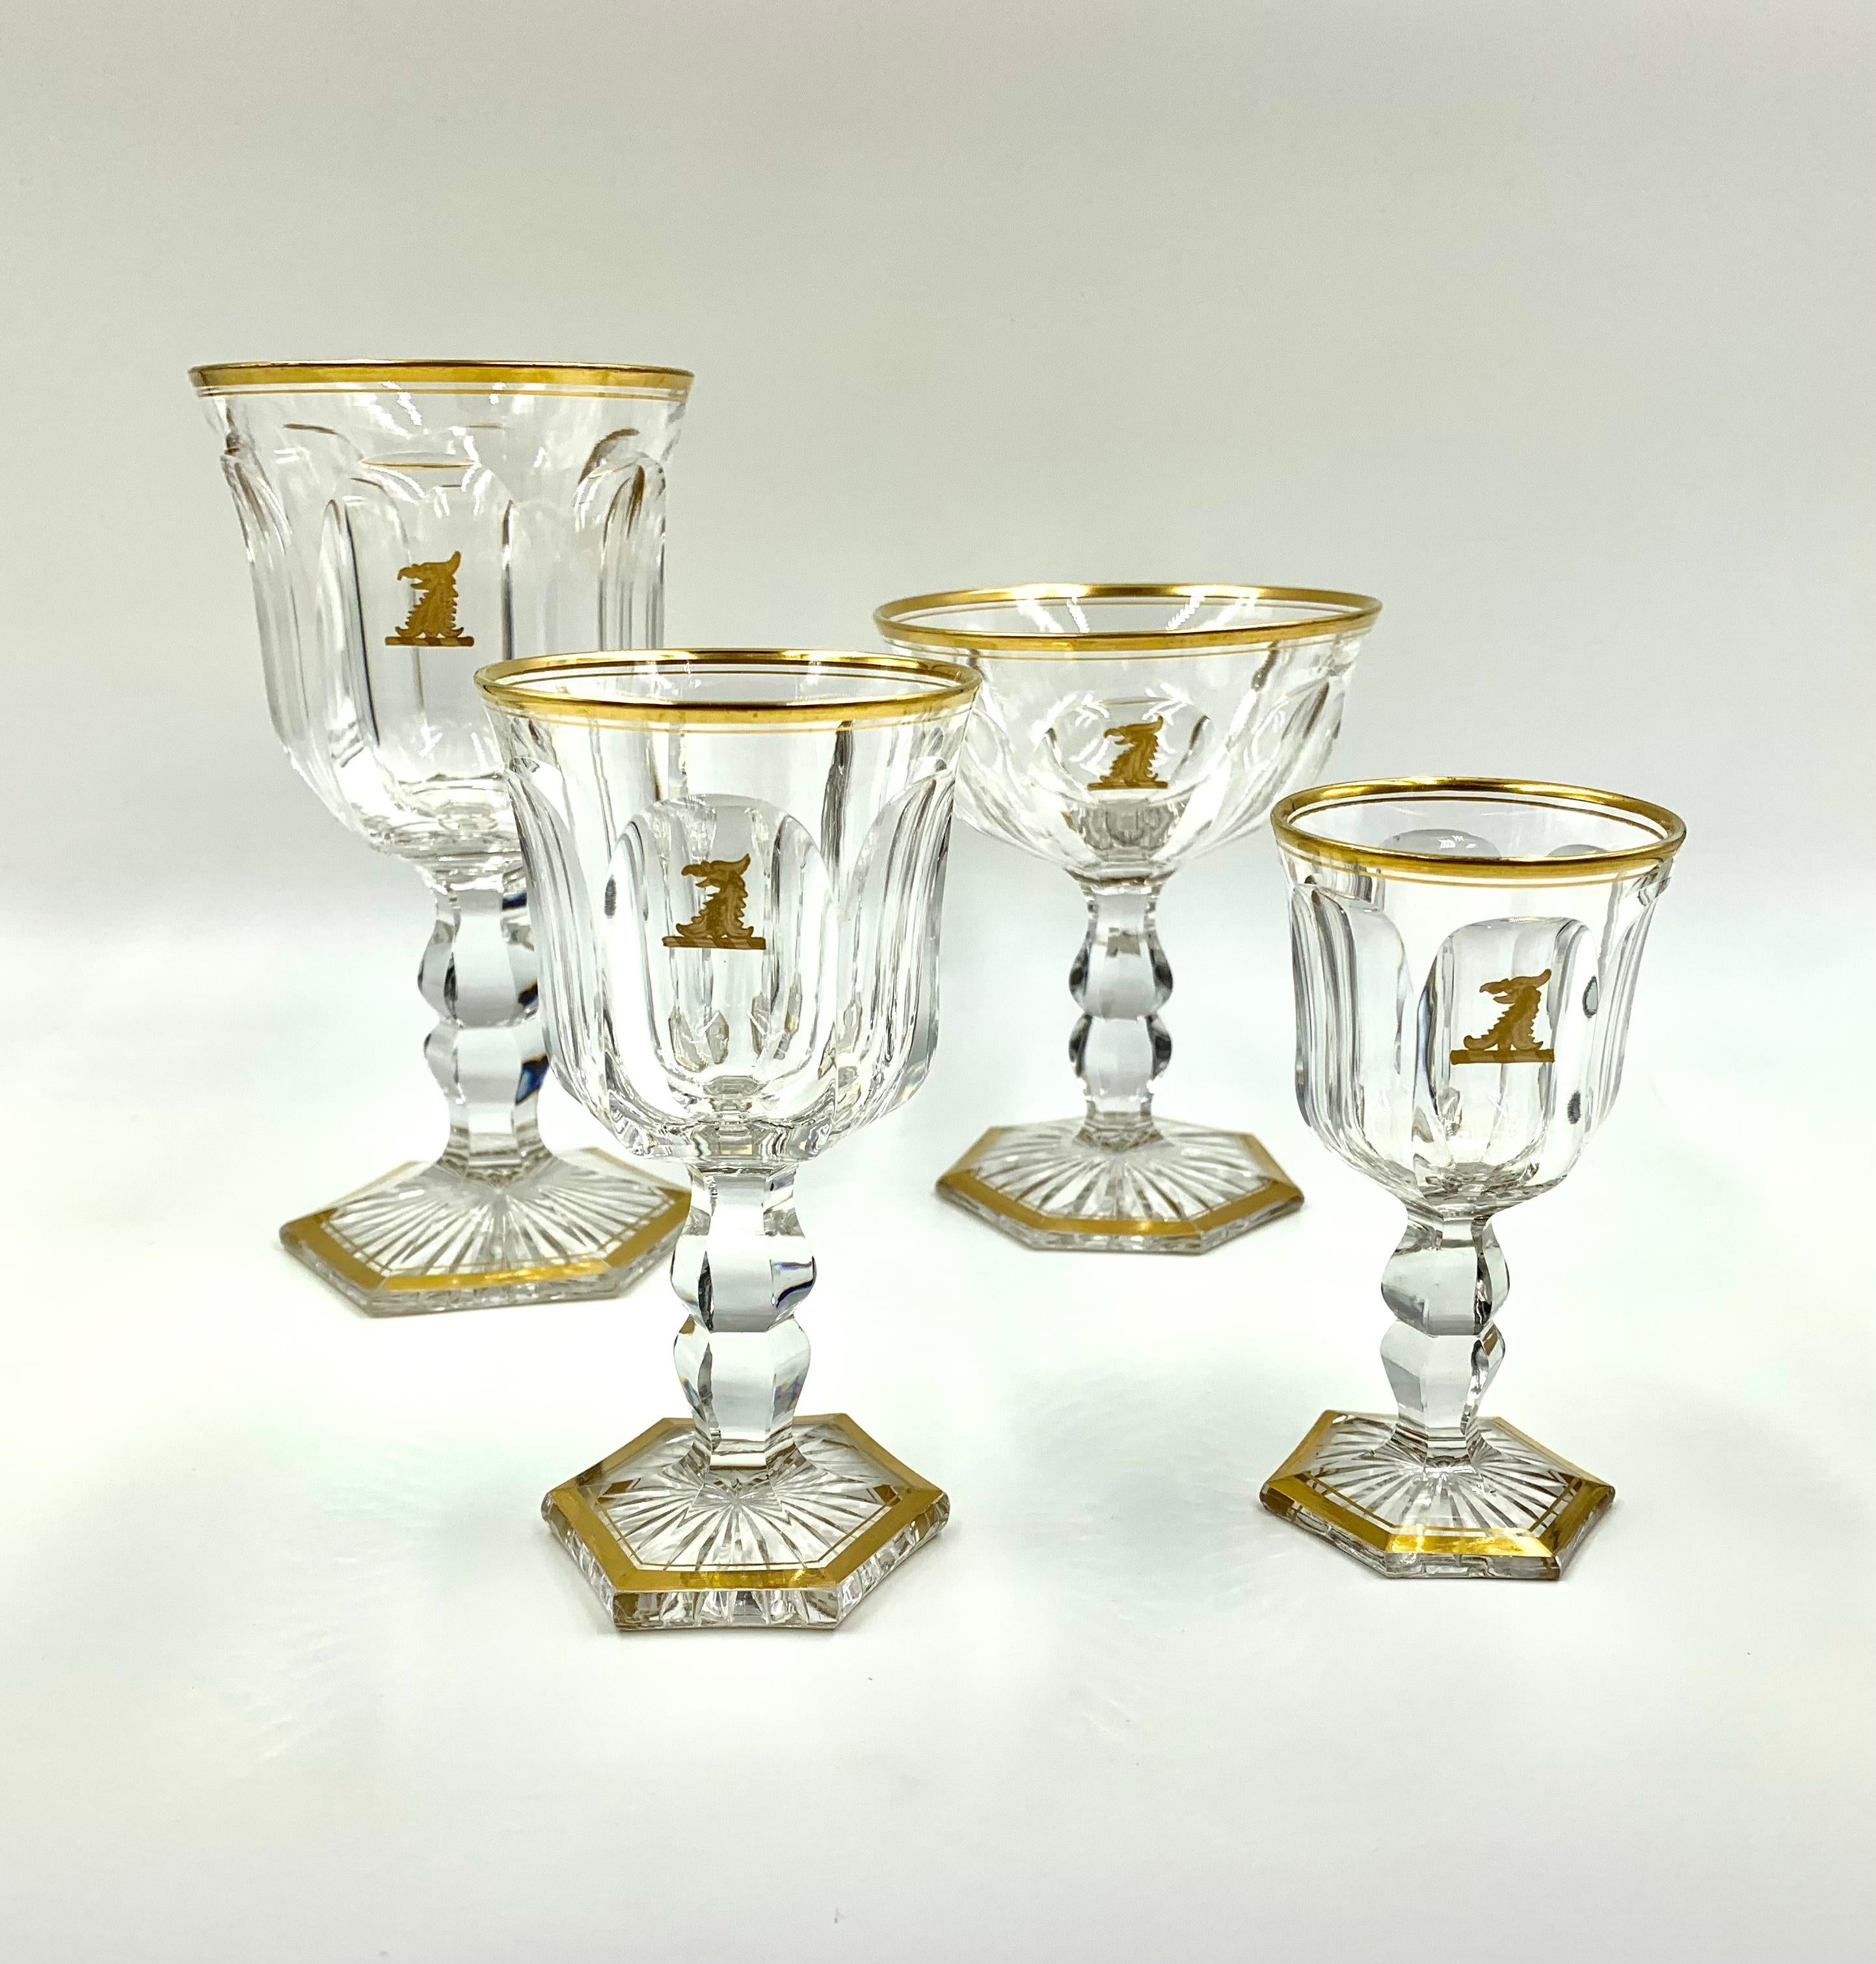 French Antique Baccarat Crystal Empire Armorial Crest 34 Piece Stemware Service for 8 For Sale